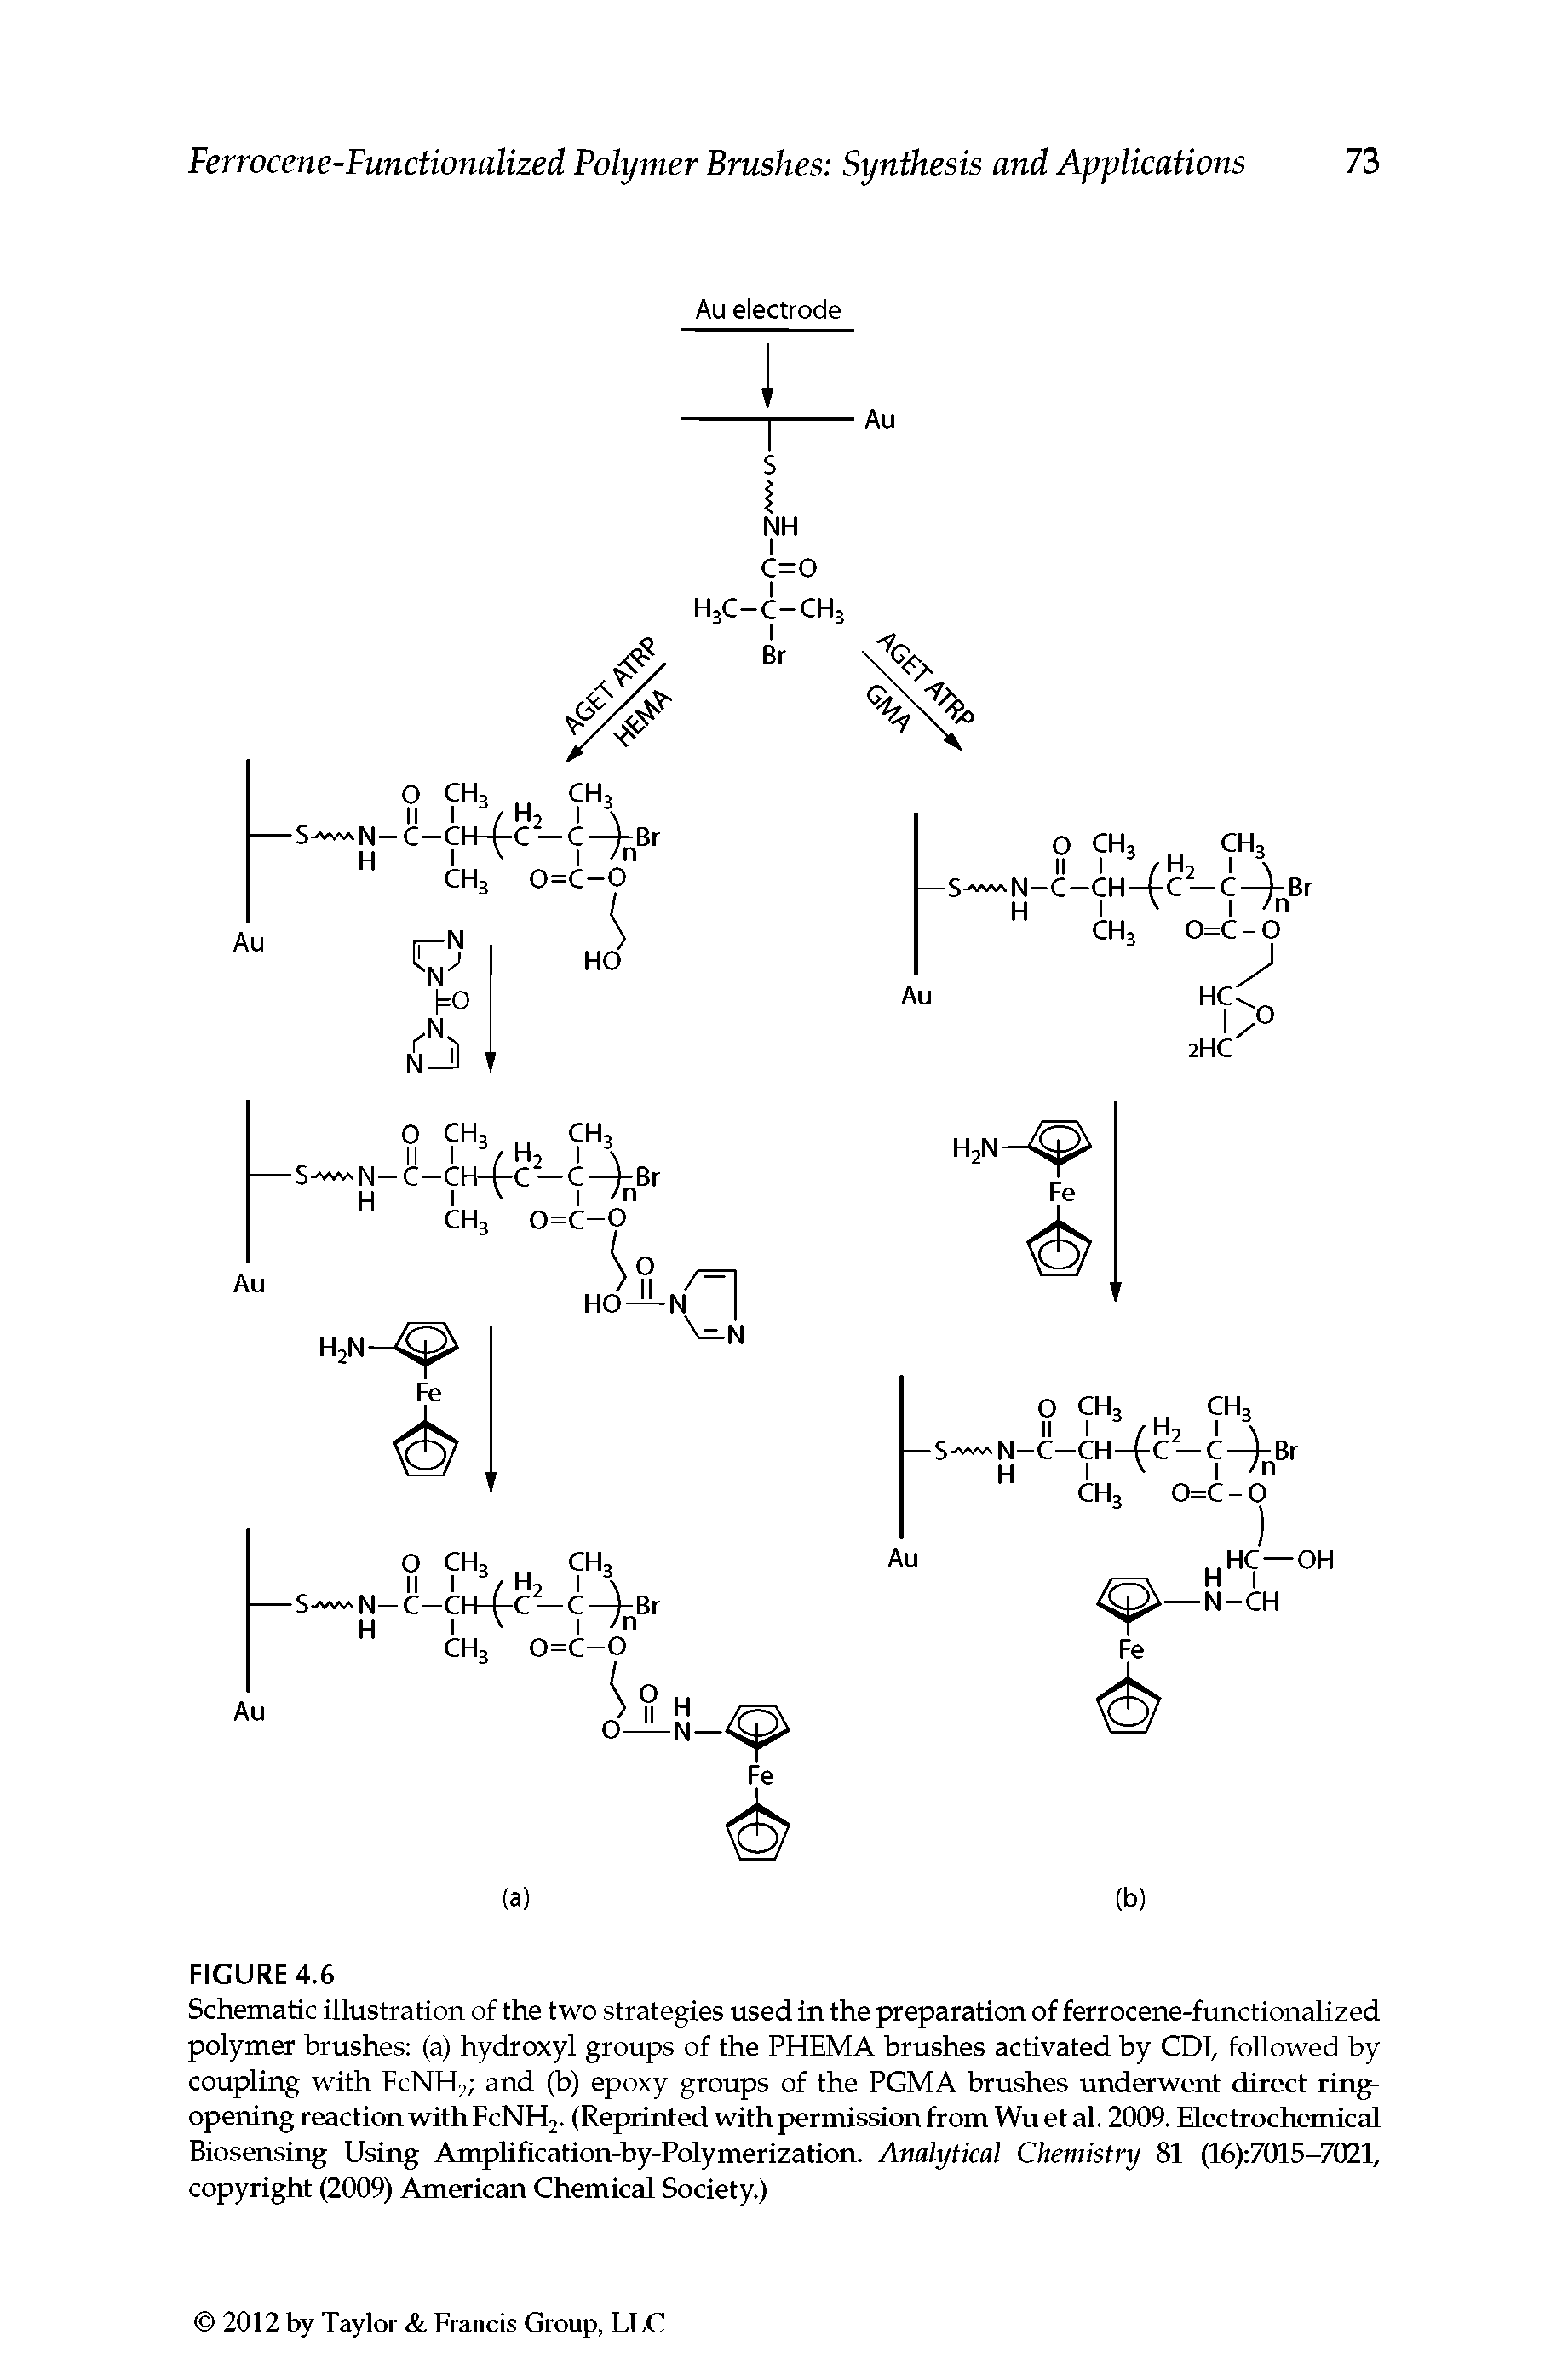 Schematic illustration of the two strategies used in the preparation of ferrocene-functionalized polymer brushes (a) hydroxyl groups of the PHEMA brushes activated by CDl, followed by coupling with FCNH2 and (b) epoxy groups of the PGMA brushes underwent direct ring-opening reaction with FcNHj. (Reprinted with permission from Wu et al. 2009. Electrochemical Biosensing Using Amplification-by-Polymerization. Analytical Chemistry 81 (16) 7015-7021, copyright (2(X)9) American Chemical Society.)...